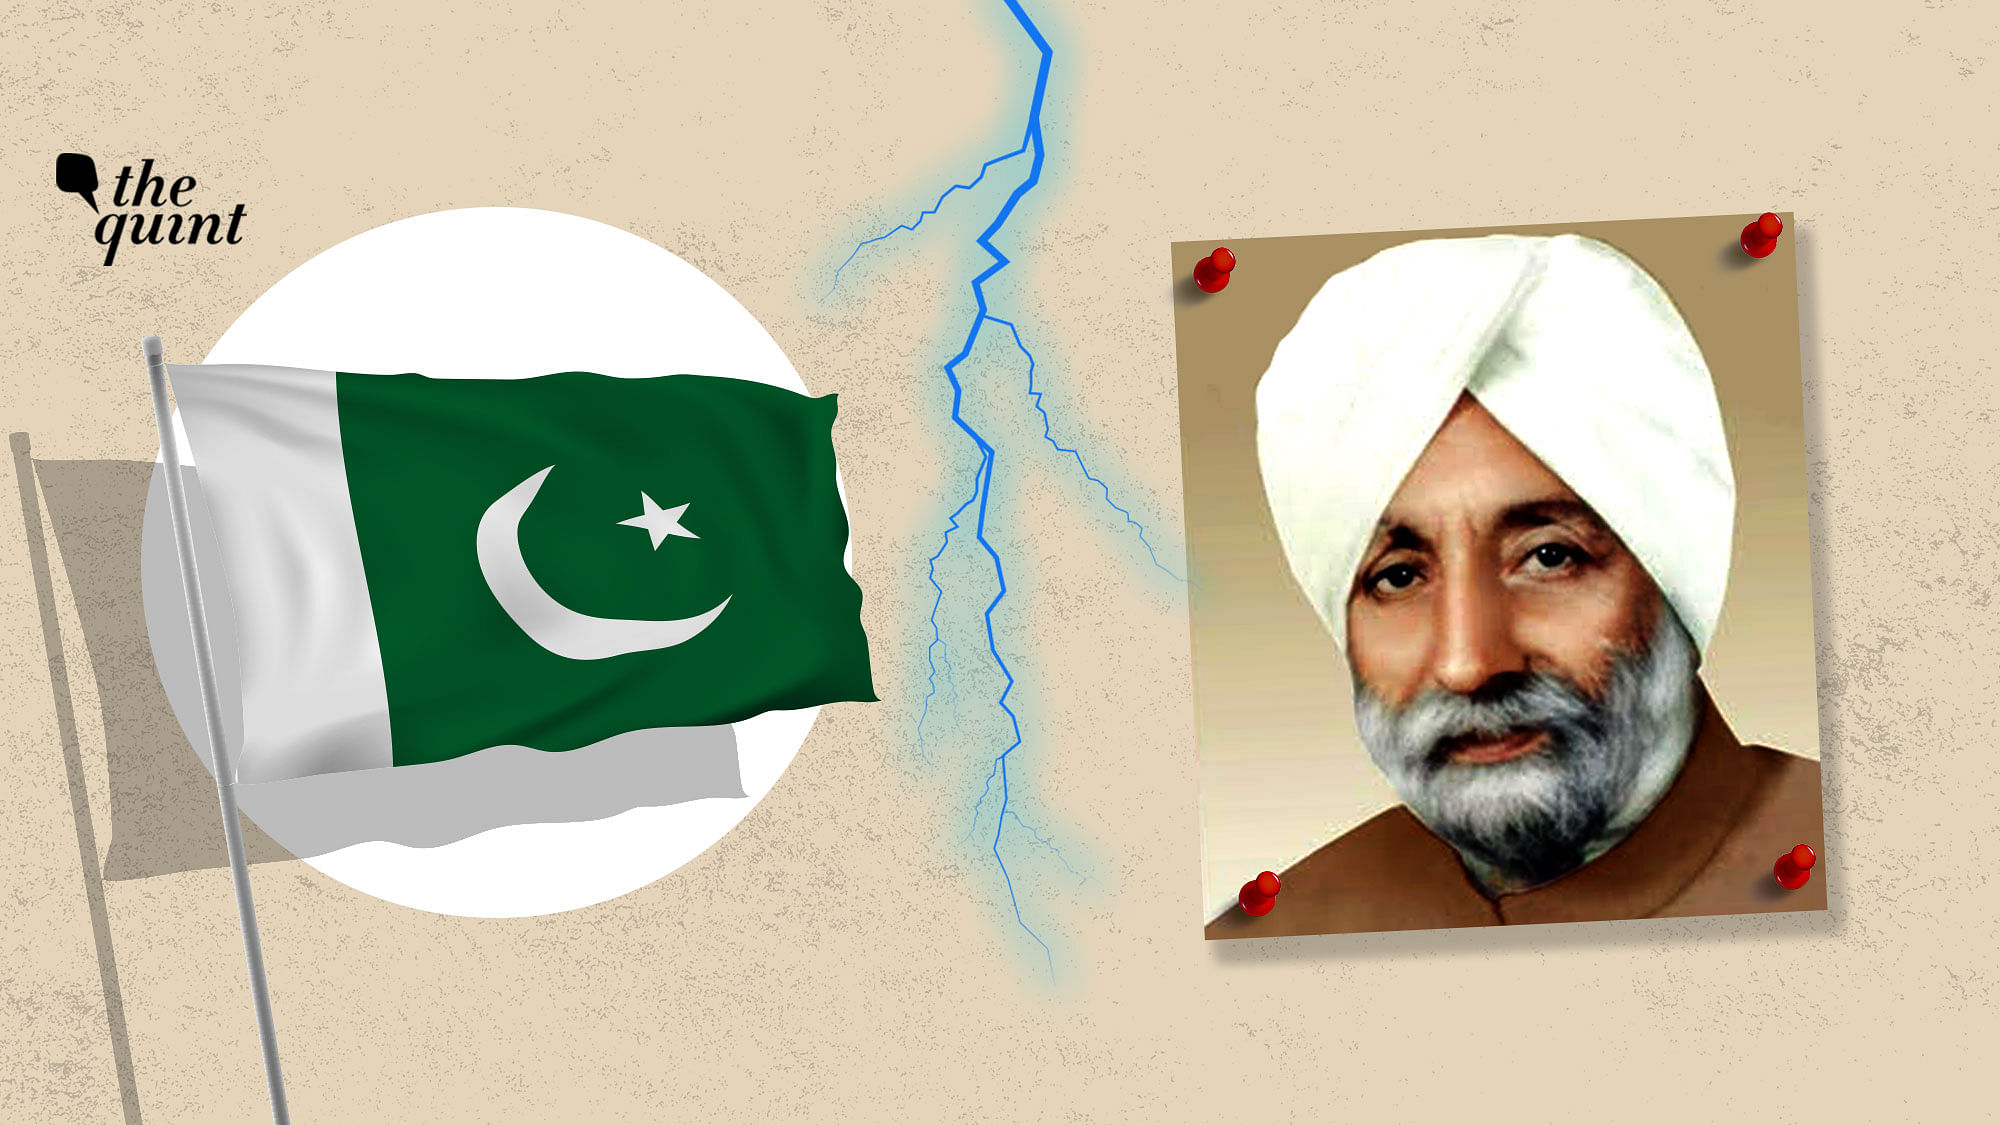 Image of former Punjab CM Beant Singh and Pakistani Flag, used for representational purposes.